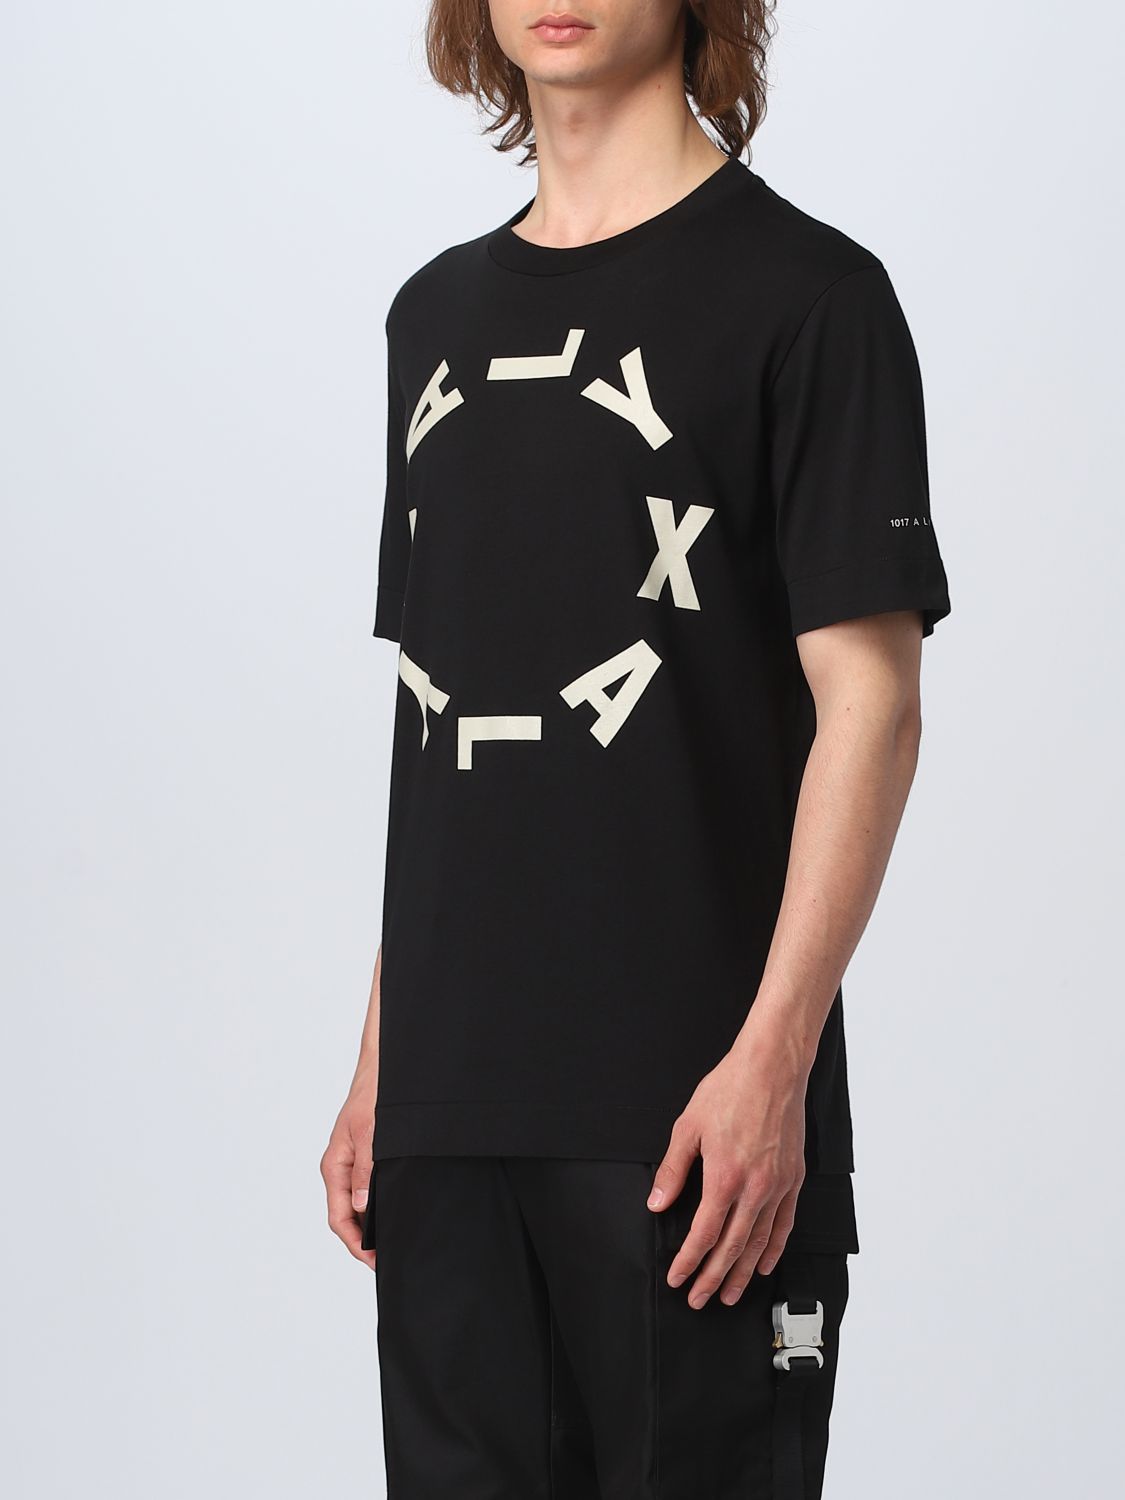 ALYX: t-shirt for man - Black | Alyx t-shirt AAUTS0398FA01 online on ...